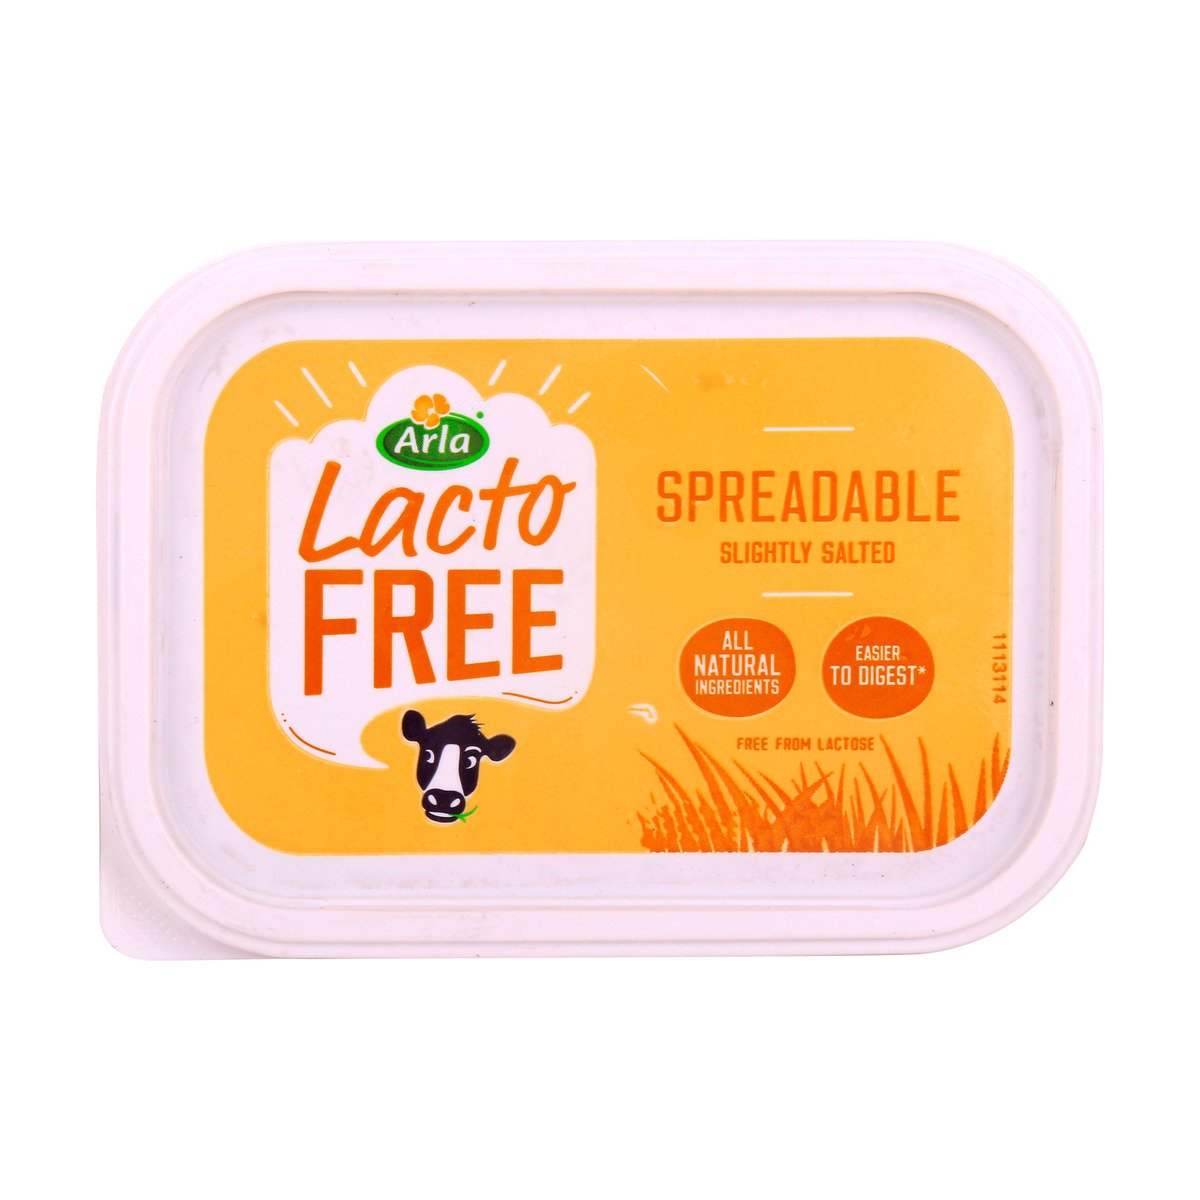 Arla Lacto Free Spreadable Slightly Salted 250 g